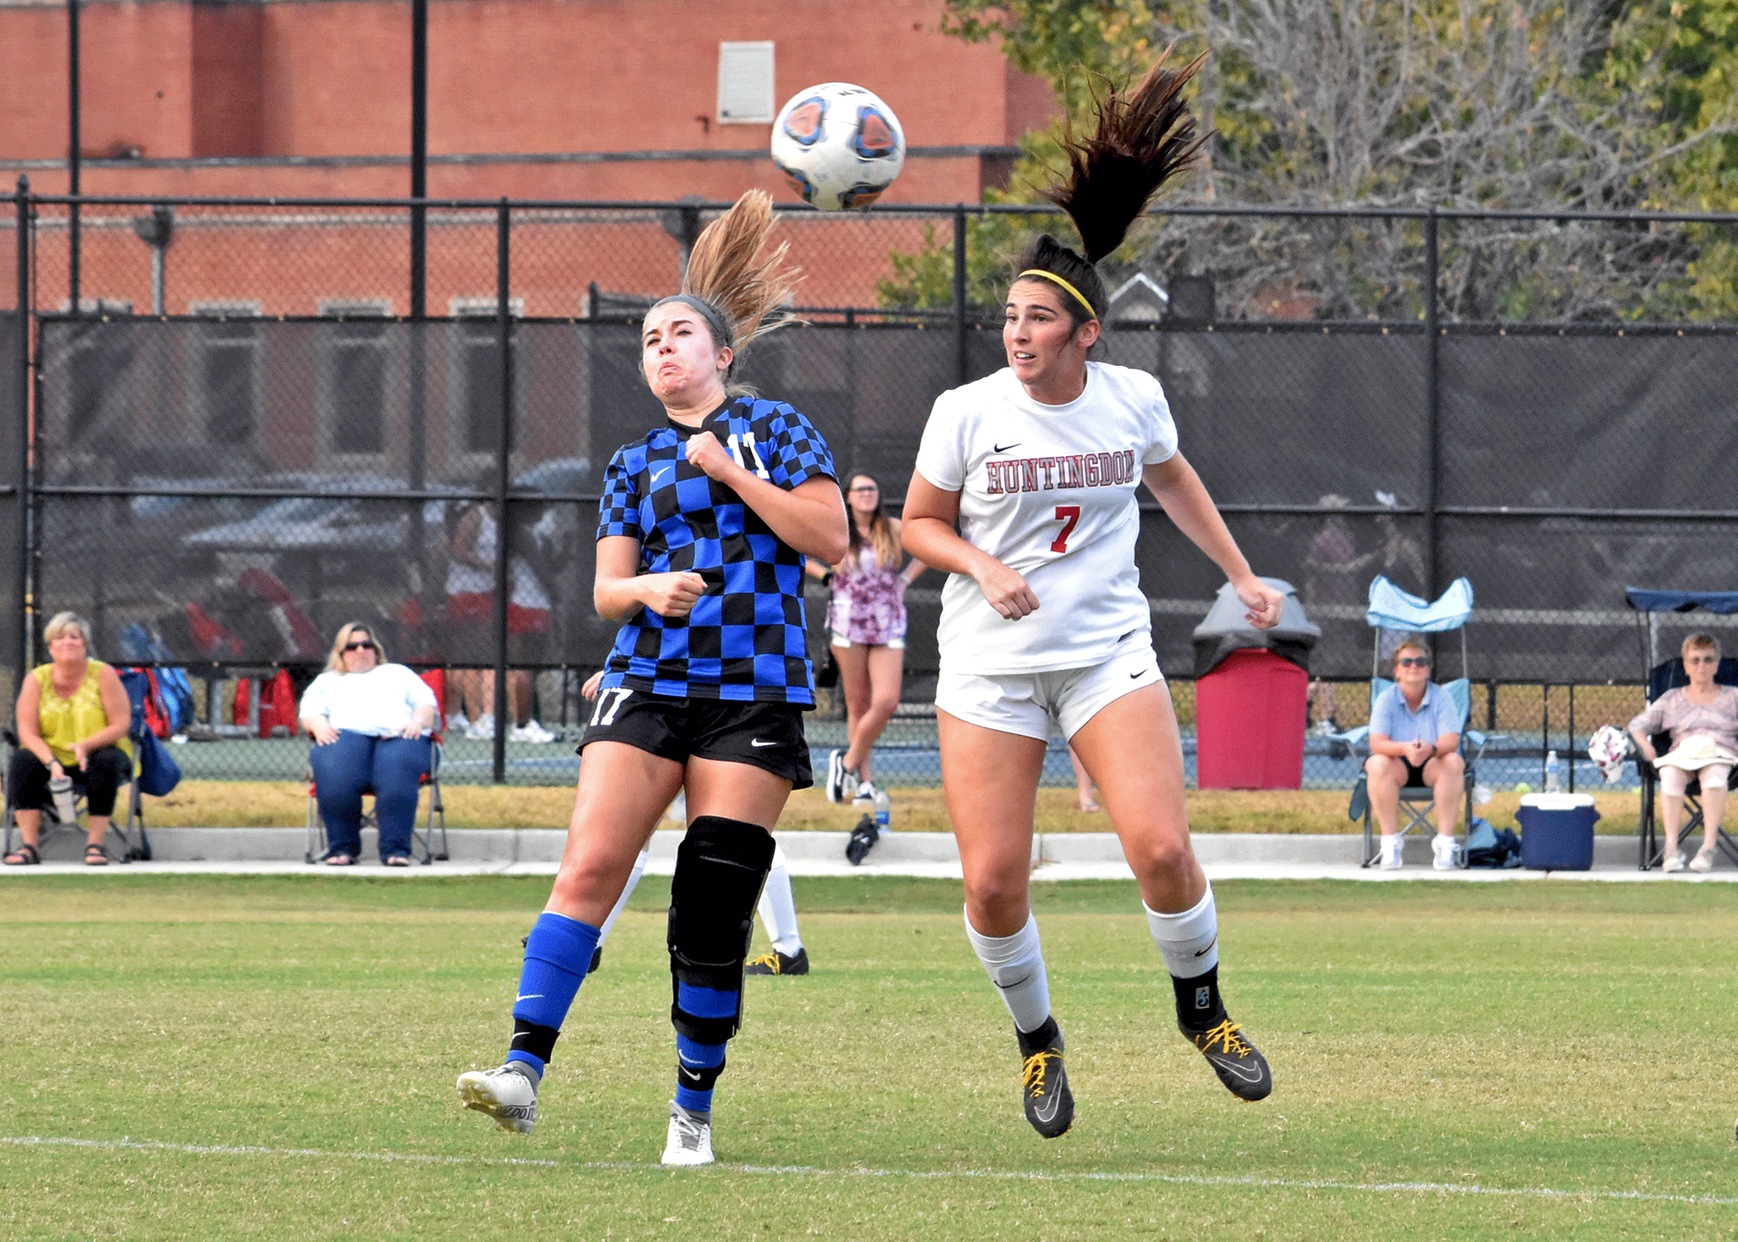 Alexis Louk had a goal and an assist on Wednesday in the first round of the USA South Tournament.